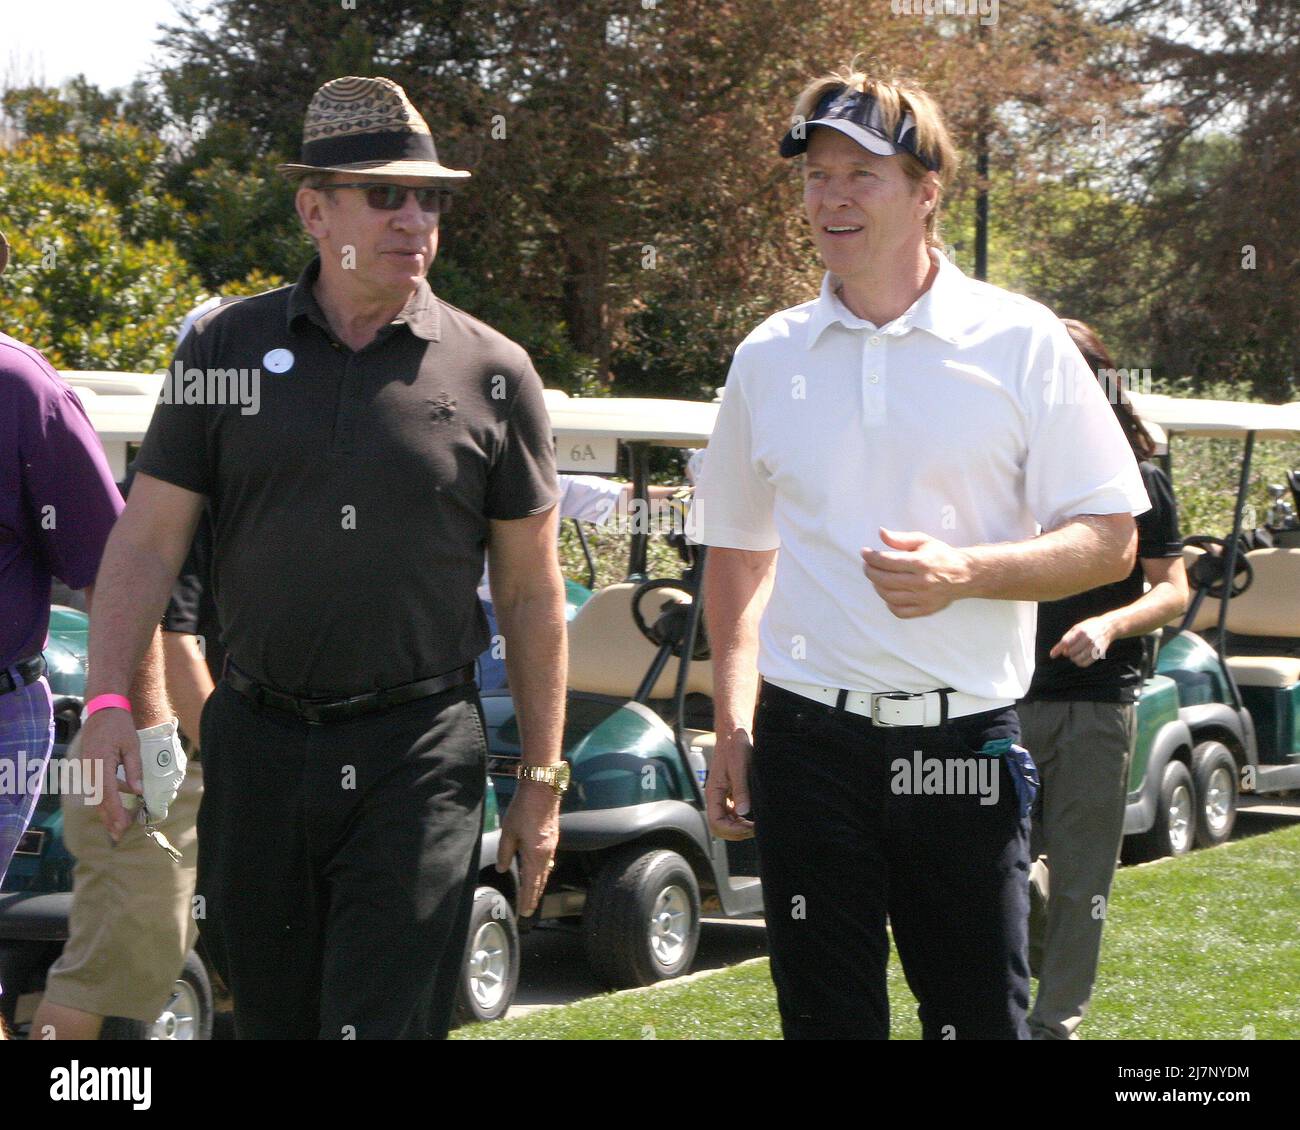 LOS ANGELES - APR 14:  Tim Allen, Jack Wagner at the Jack Wagner Anuual Golf Tournament benefitting LLS at Lakeside Golf Course on April 14, 2014 in Burbank, CA Stock Photo